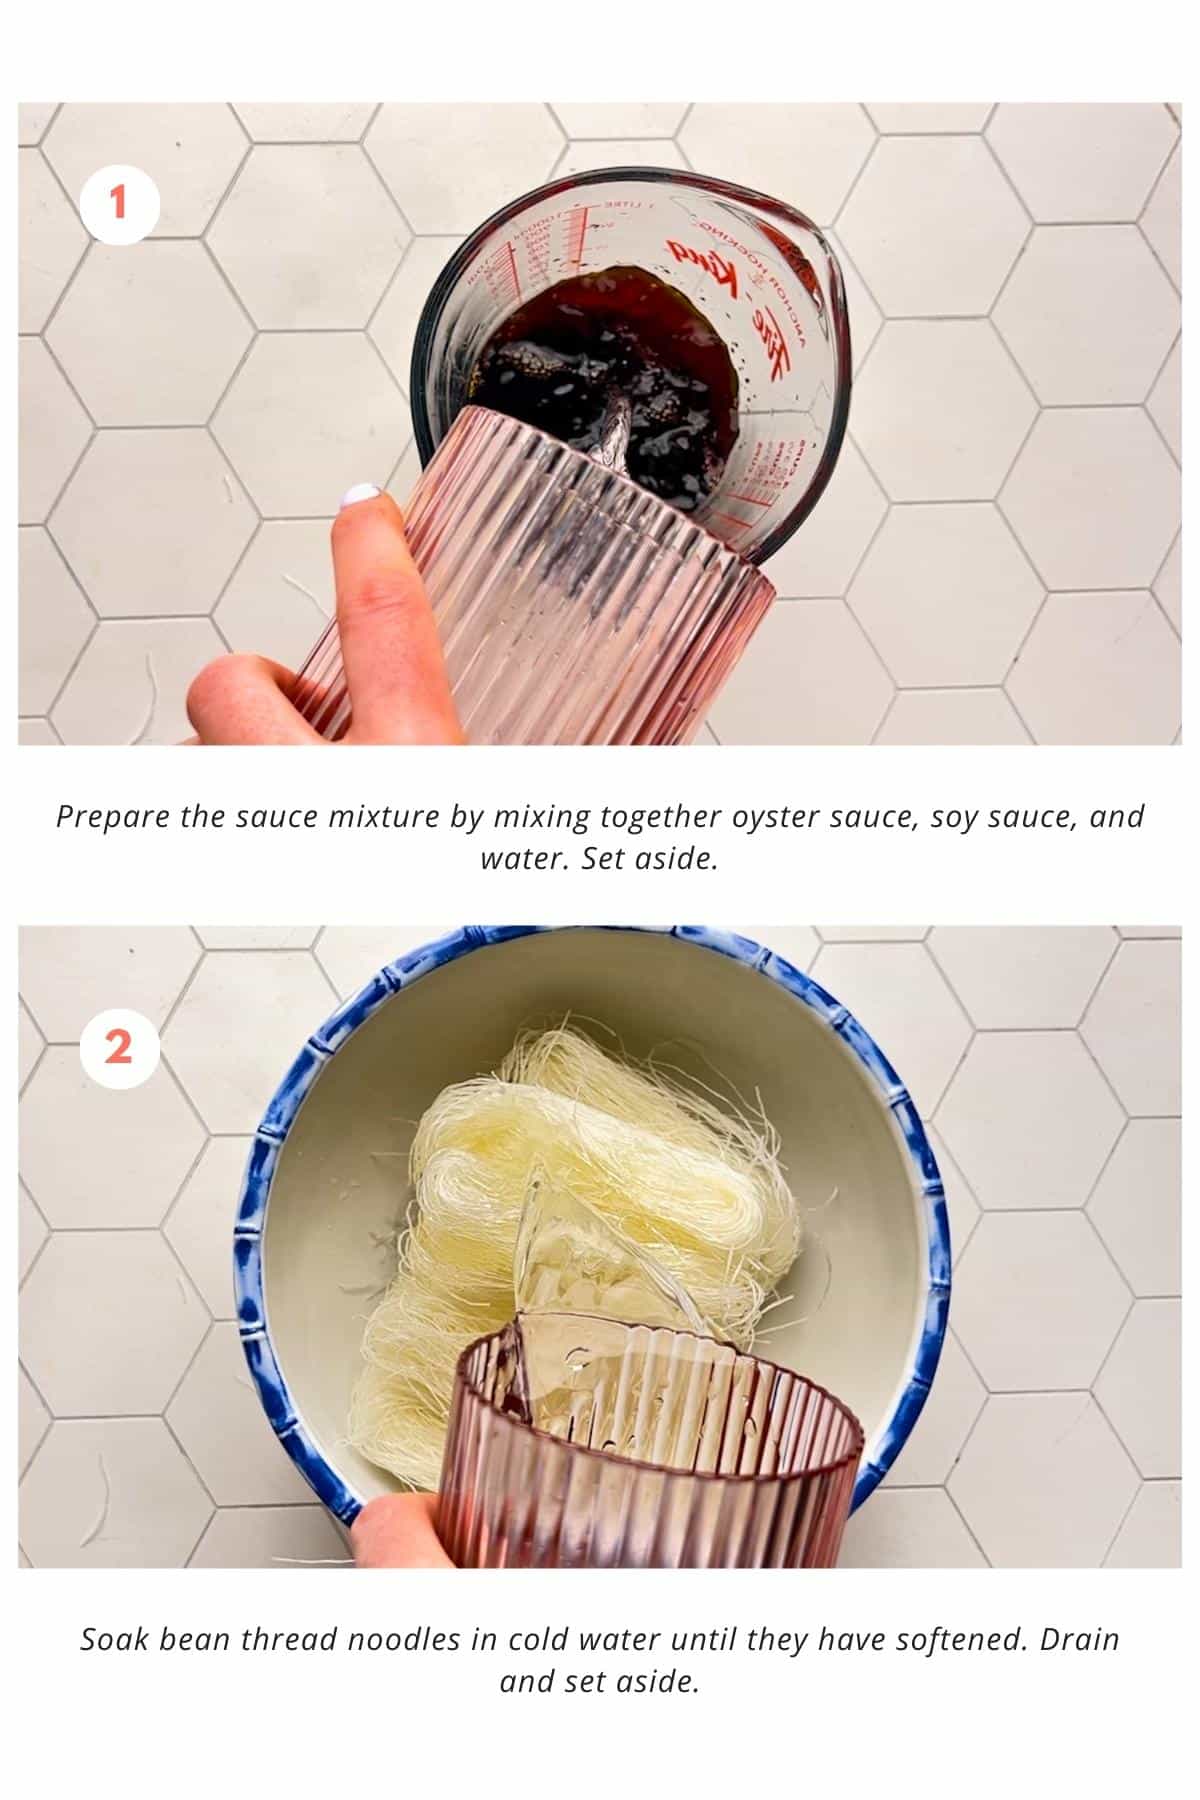 Sauce mixture is prepared by combining oyster sauce, soy sauce, and water. Bean thread noodles are soaked in cold water until softened, then drained.